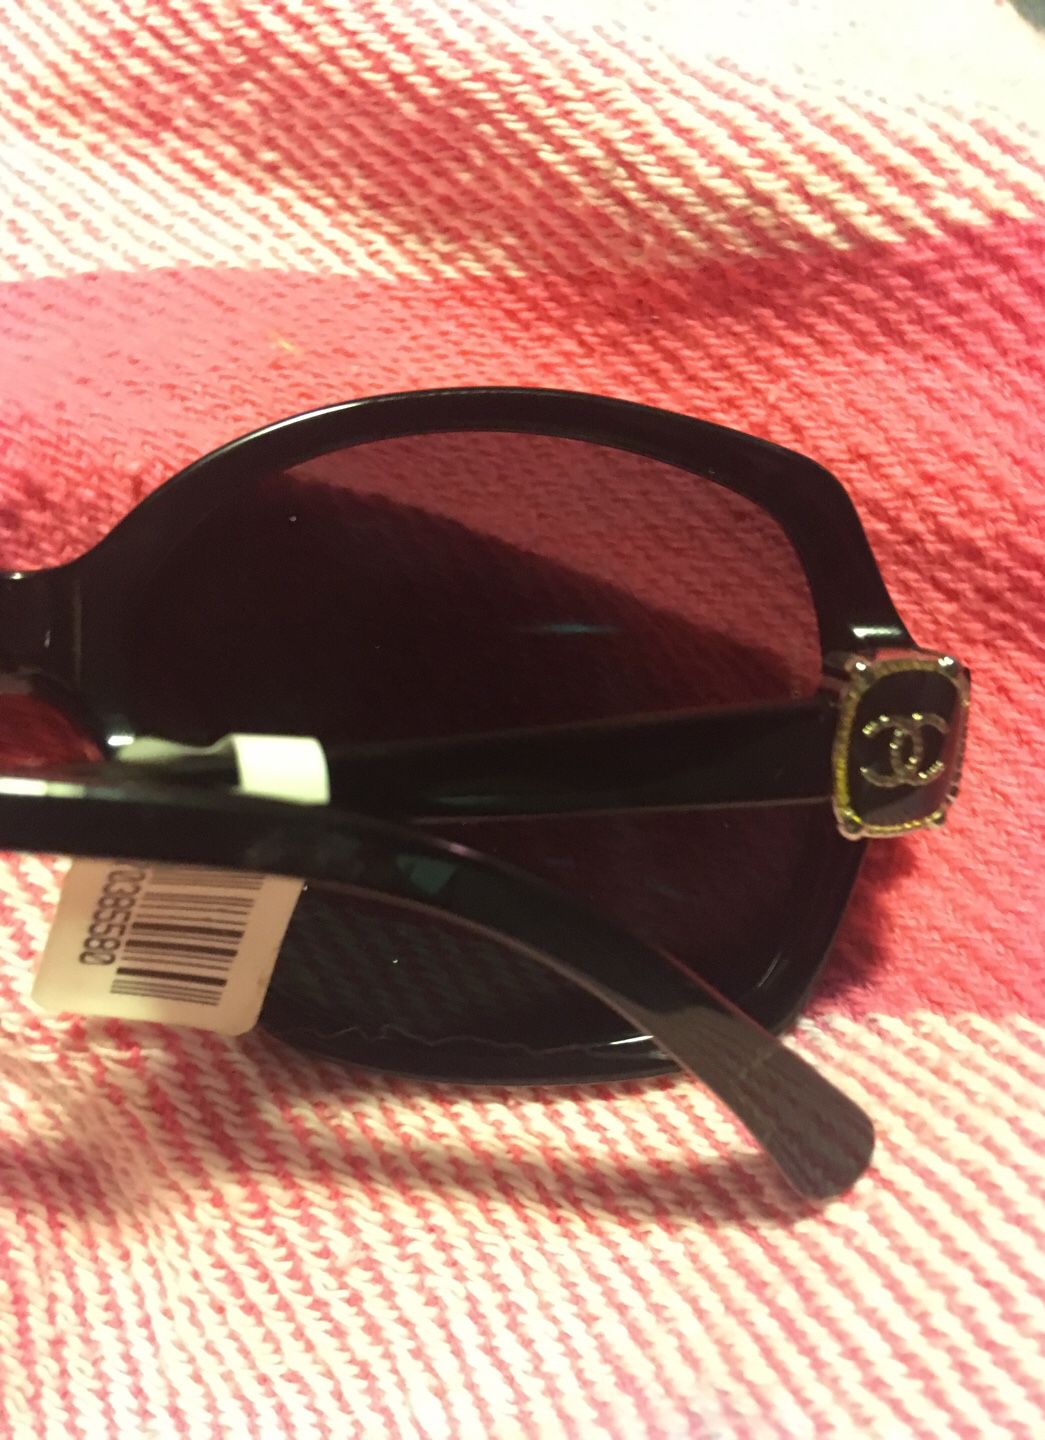 Women's CHANEL Sunglasses. *AUTHENTIC!* for Sale in Bothell, WA - OfferUp